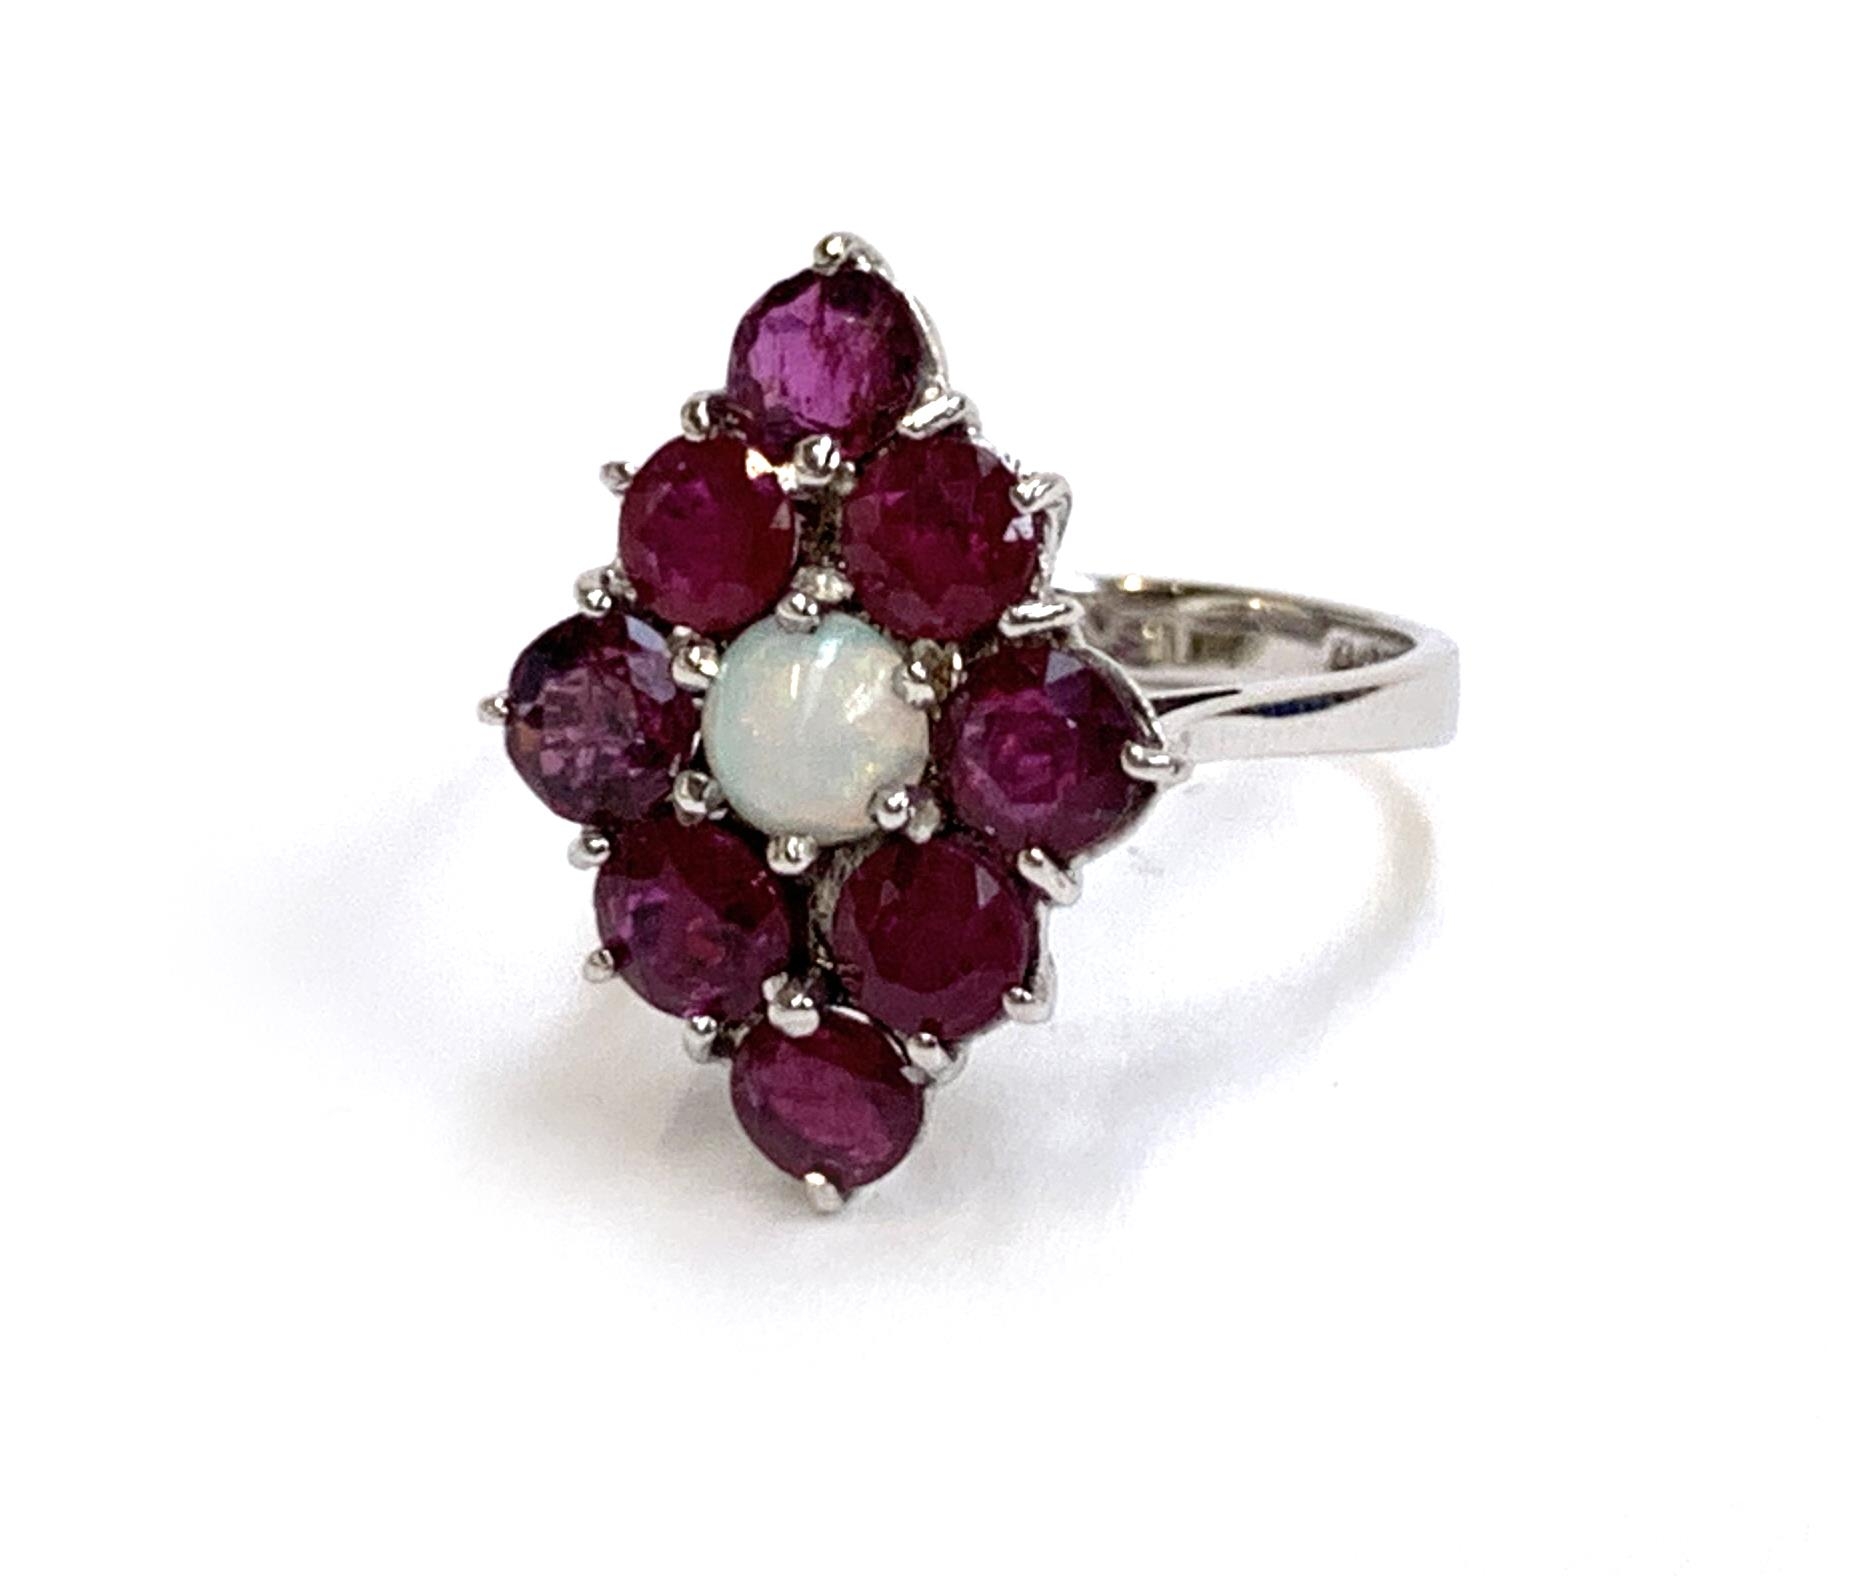 A 9ct white gold ring set with a navette form cluster of rubies and a central opal, size J, 3.2g - Image 2 of 3